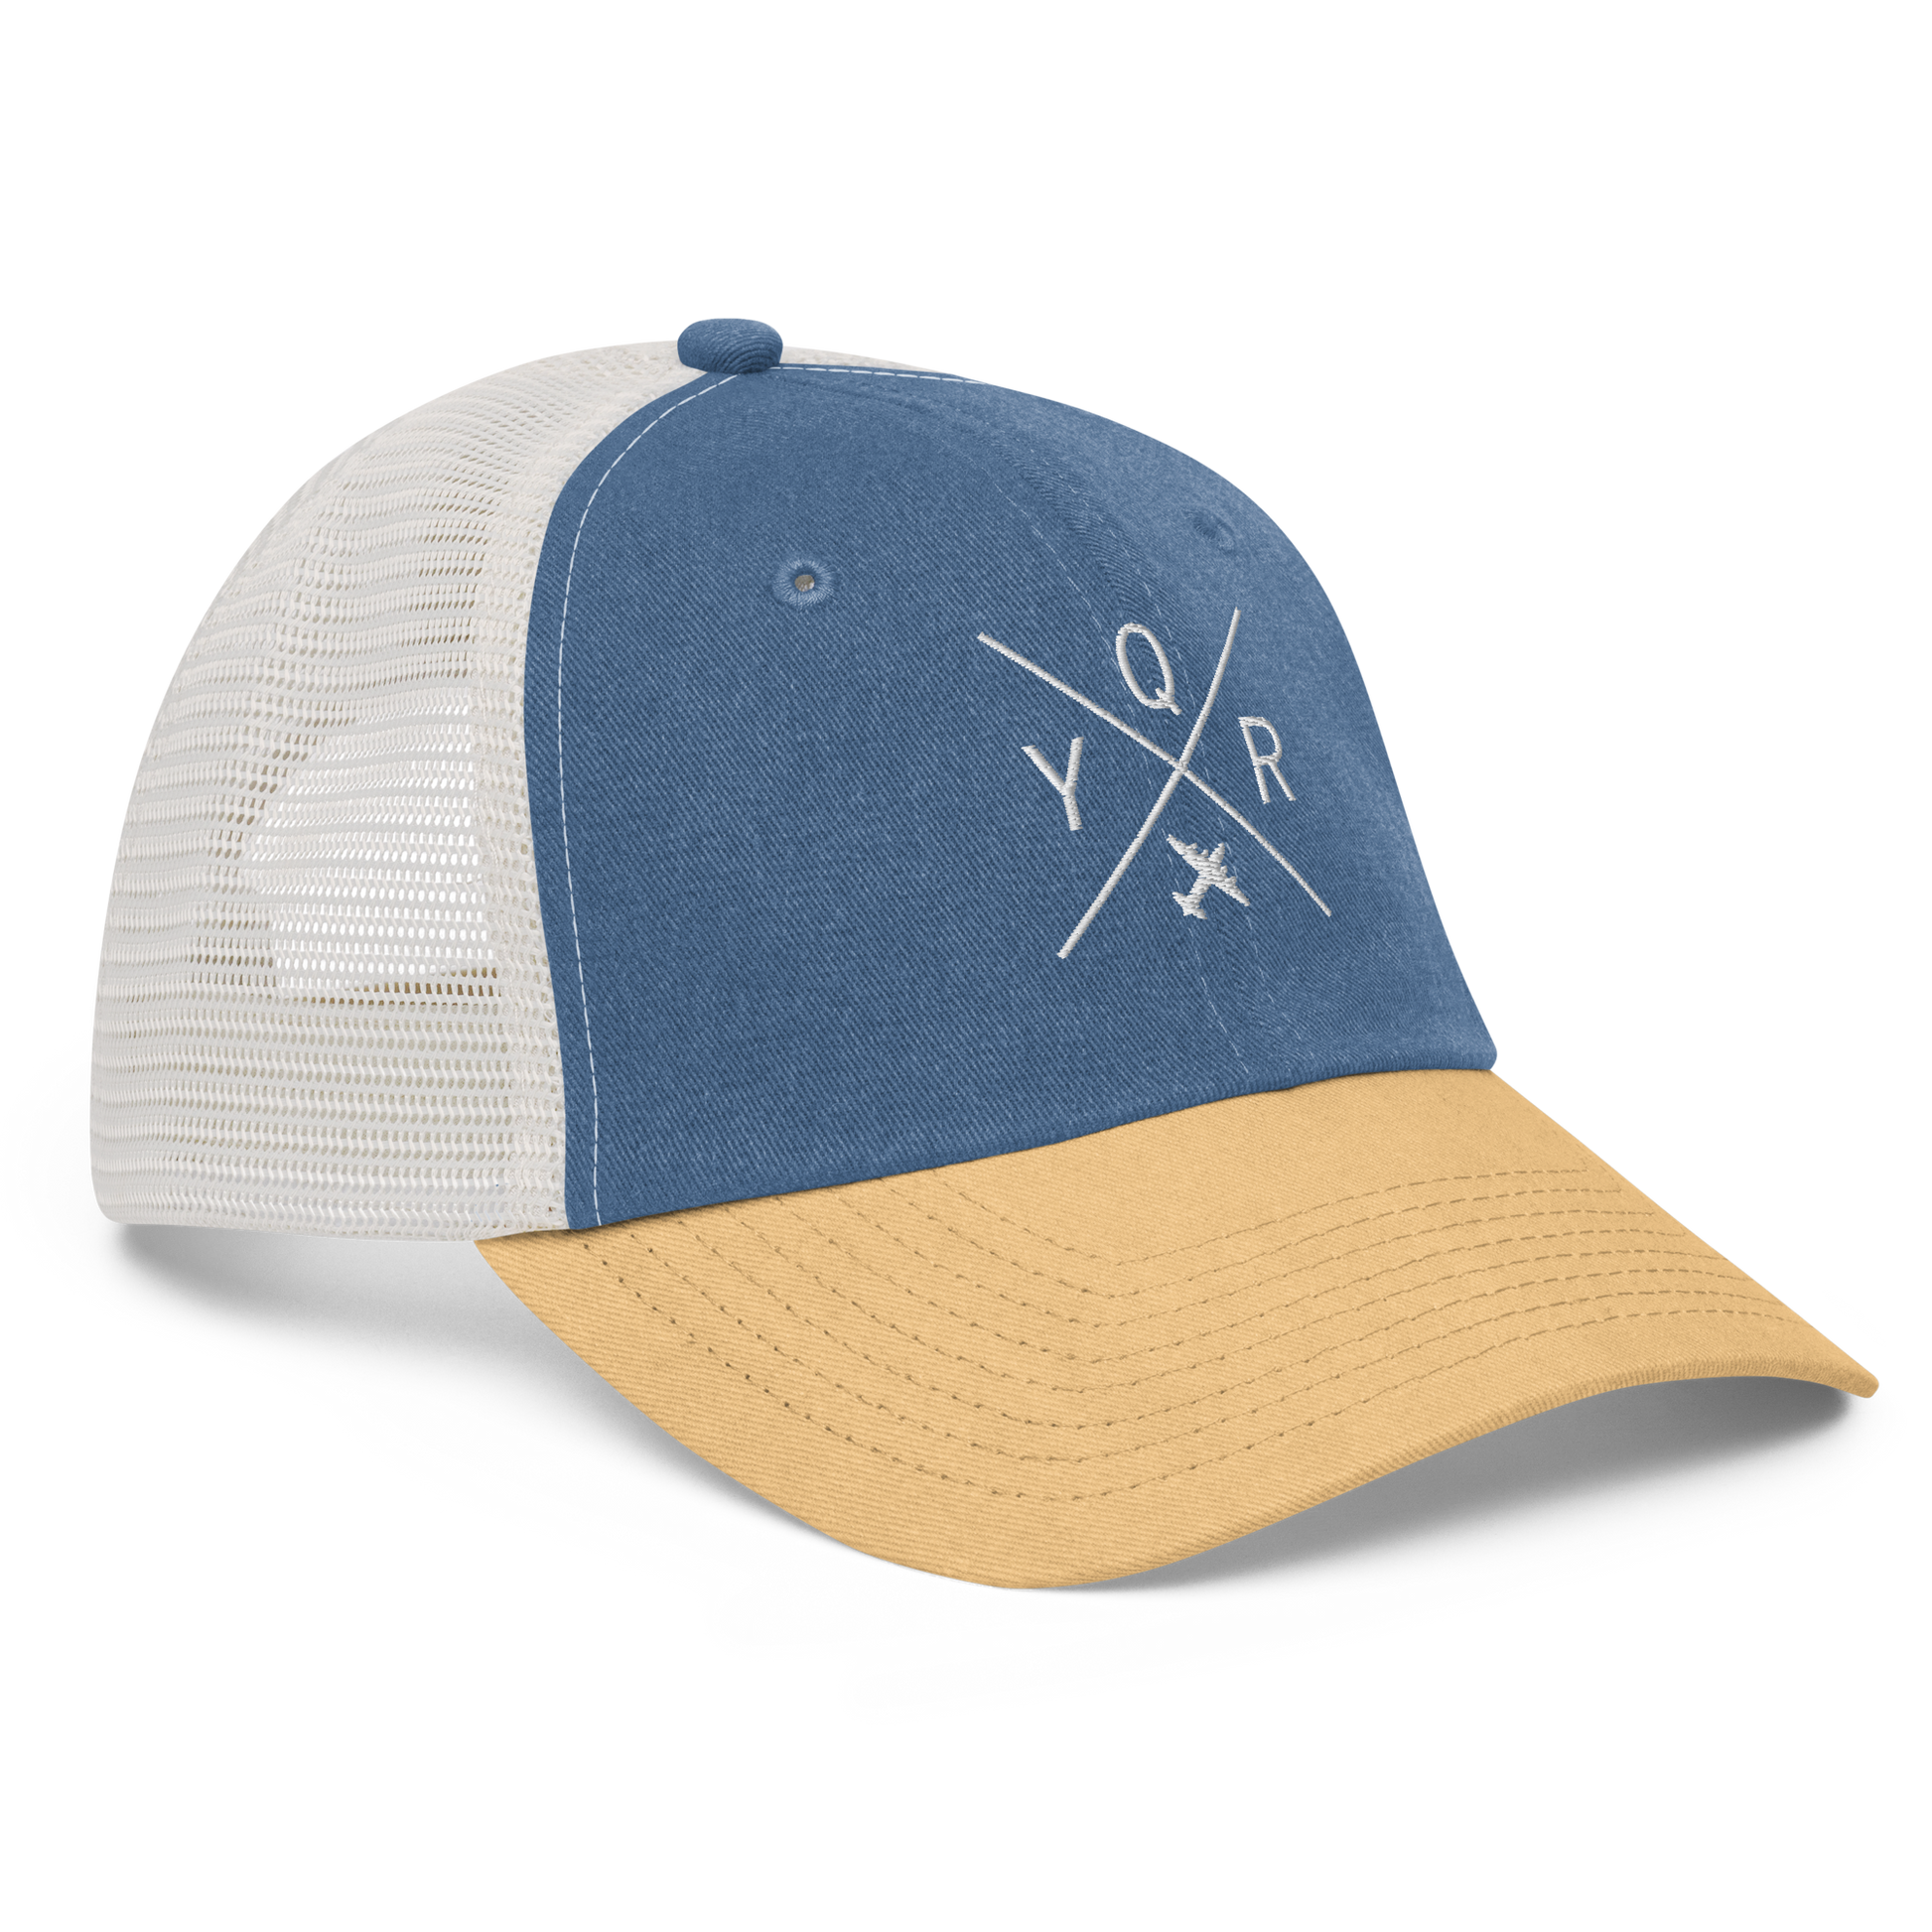 YHM Designs - YQR Regina Pigment-Dyed Trucker Cap - Crossed-X Design with Airport Code and Vintage Propliner - White Embroidery - Image 18